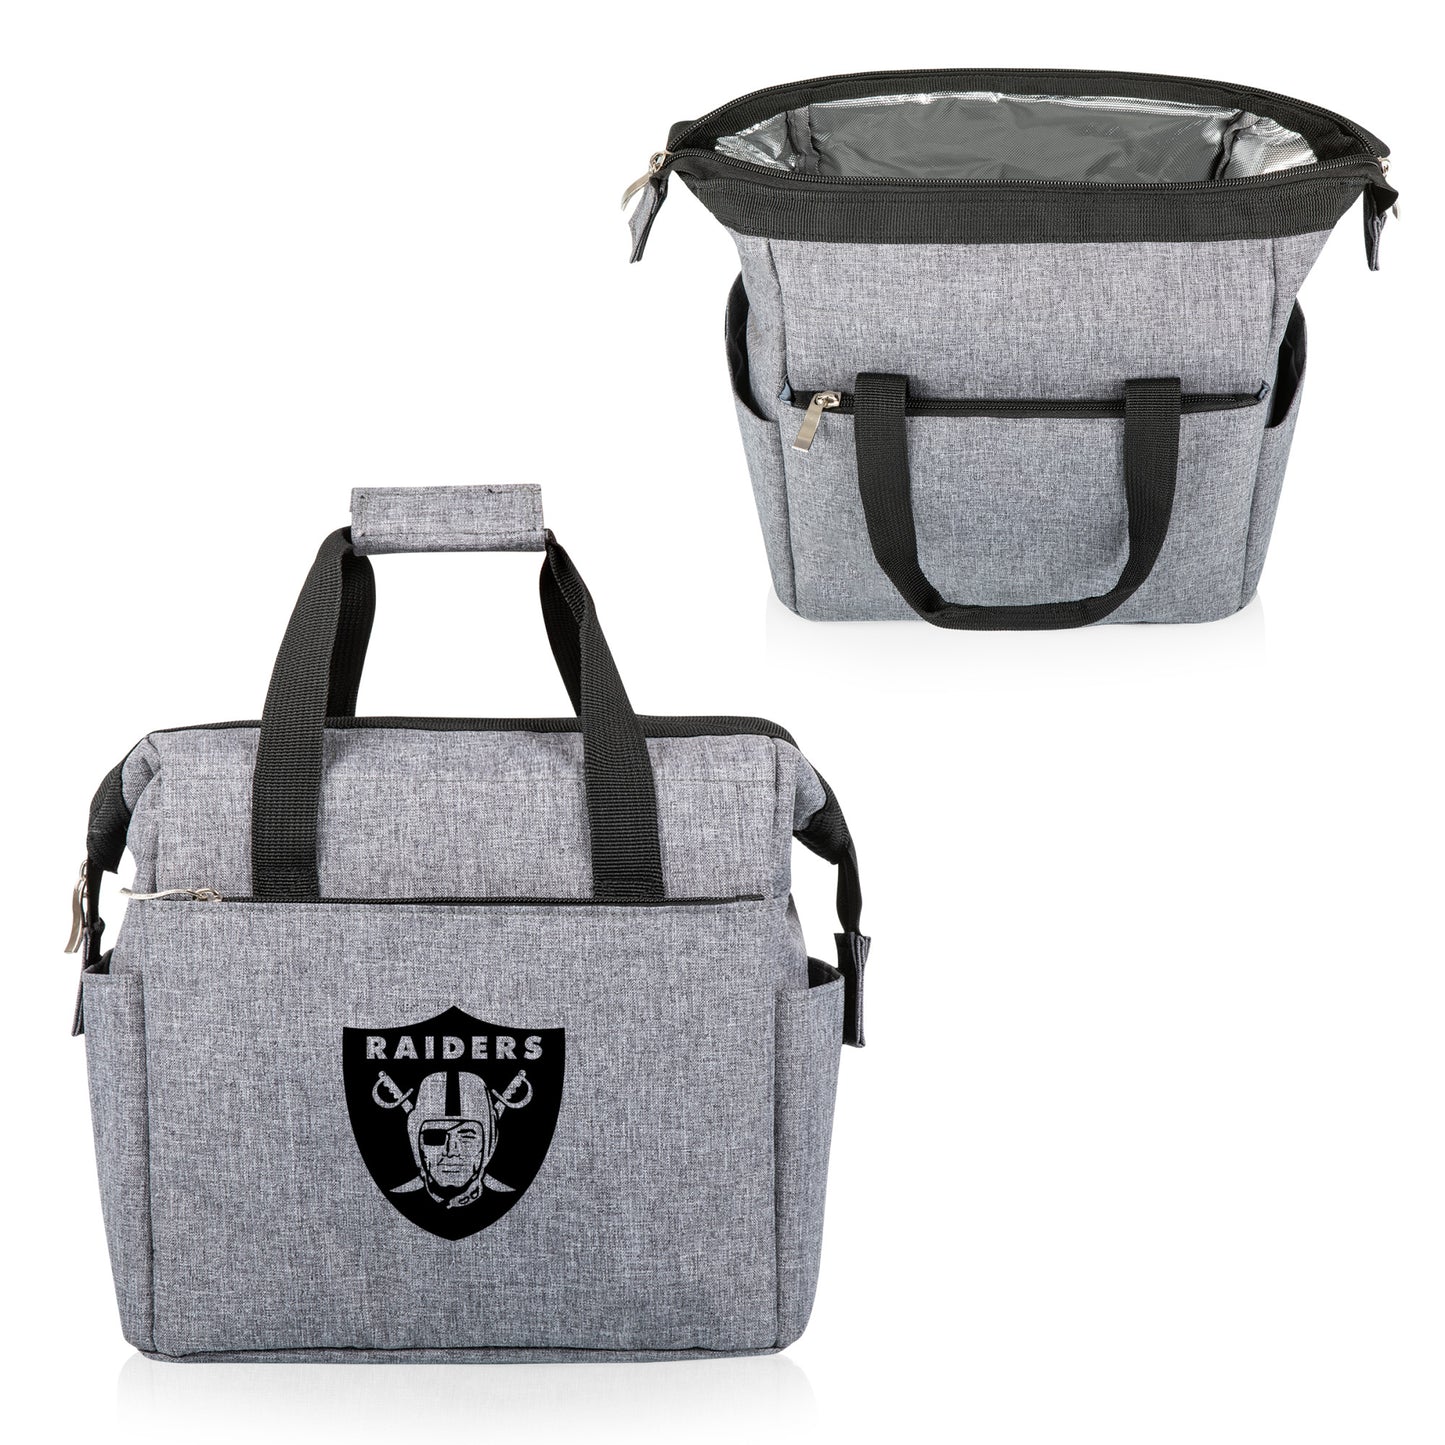 Las Vegas Raiders On The Go Lunch Cooler, (Heathered Gray)